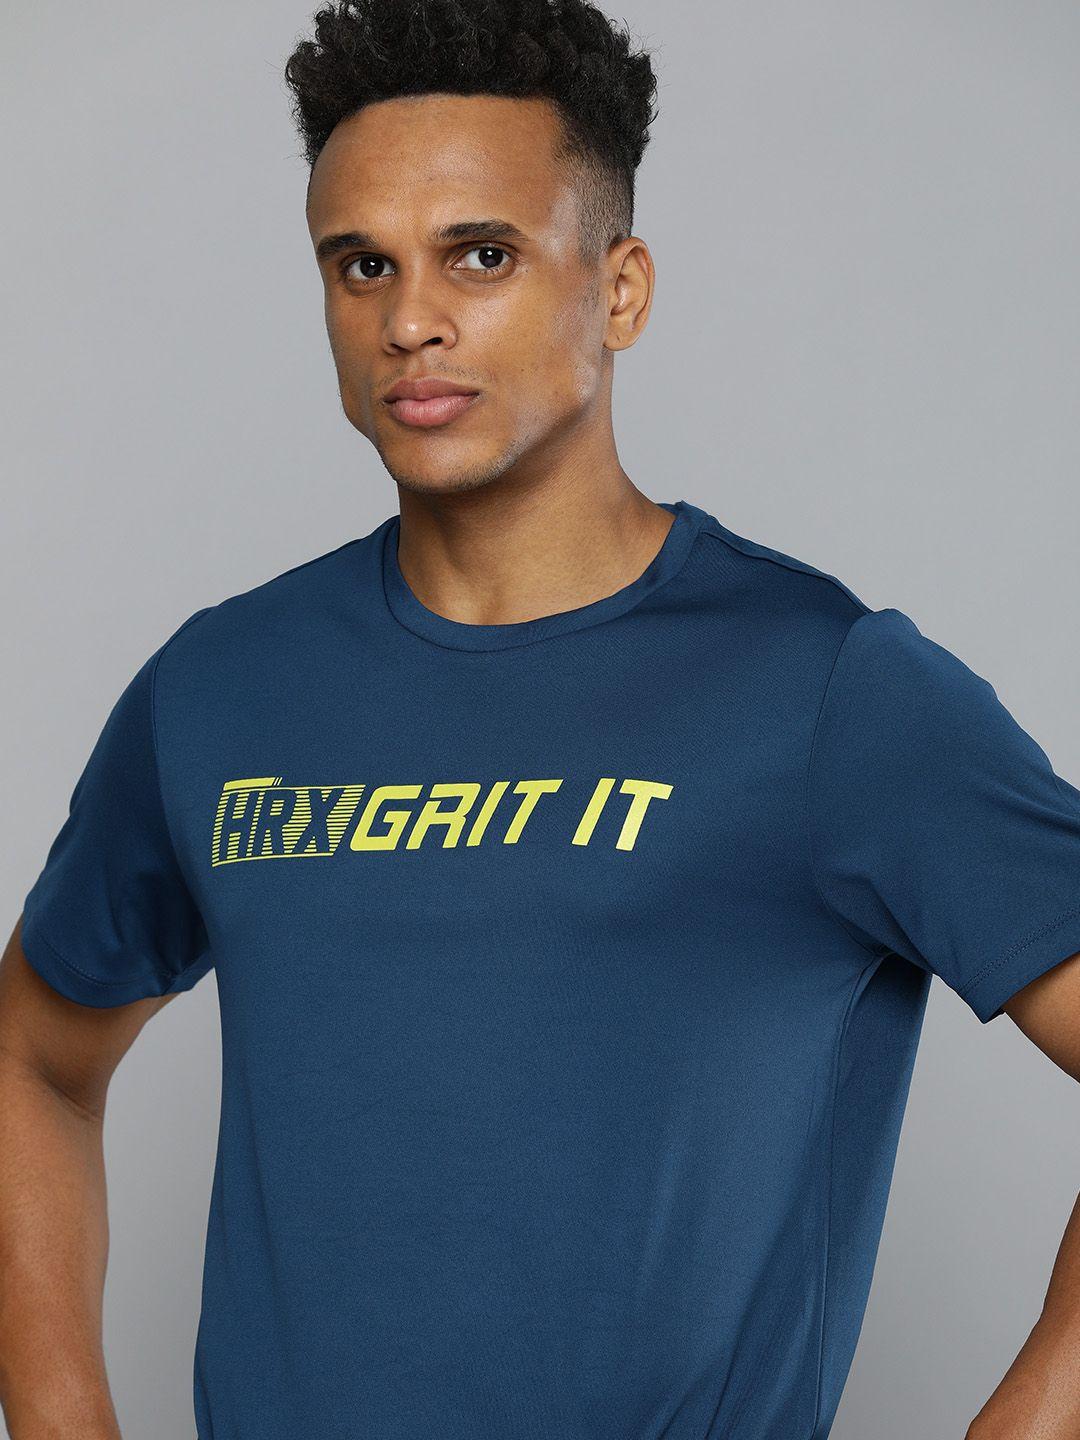 hrx by hrithik roshan men blue & yellow typography printed antimicrobial training or gym t-shirt